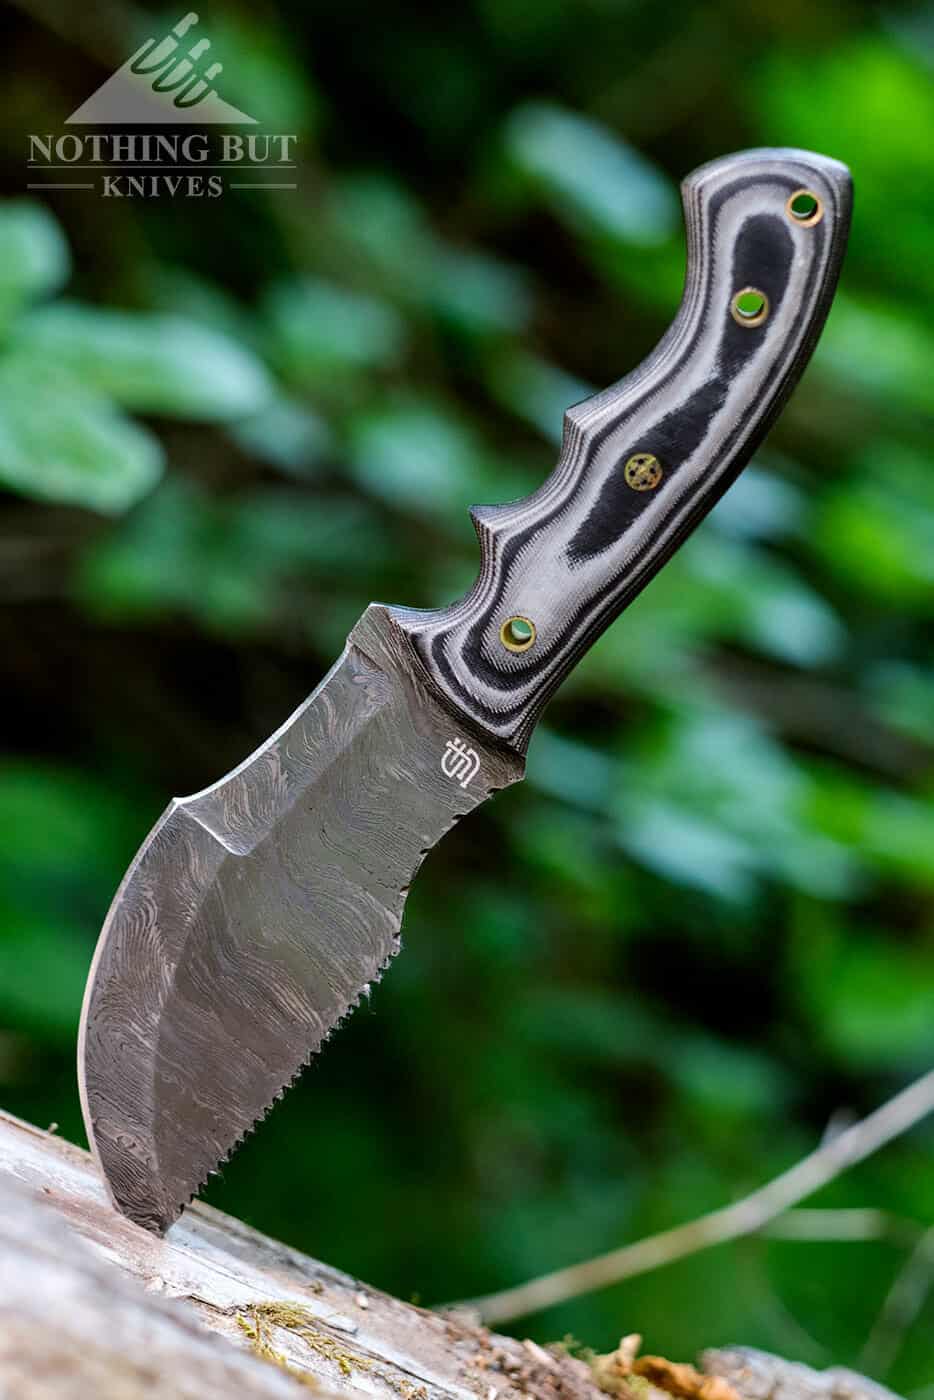 The Ironside Tracker survival knife sticking out of a dead log in the forest. 